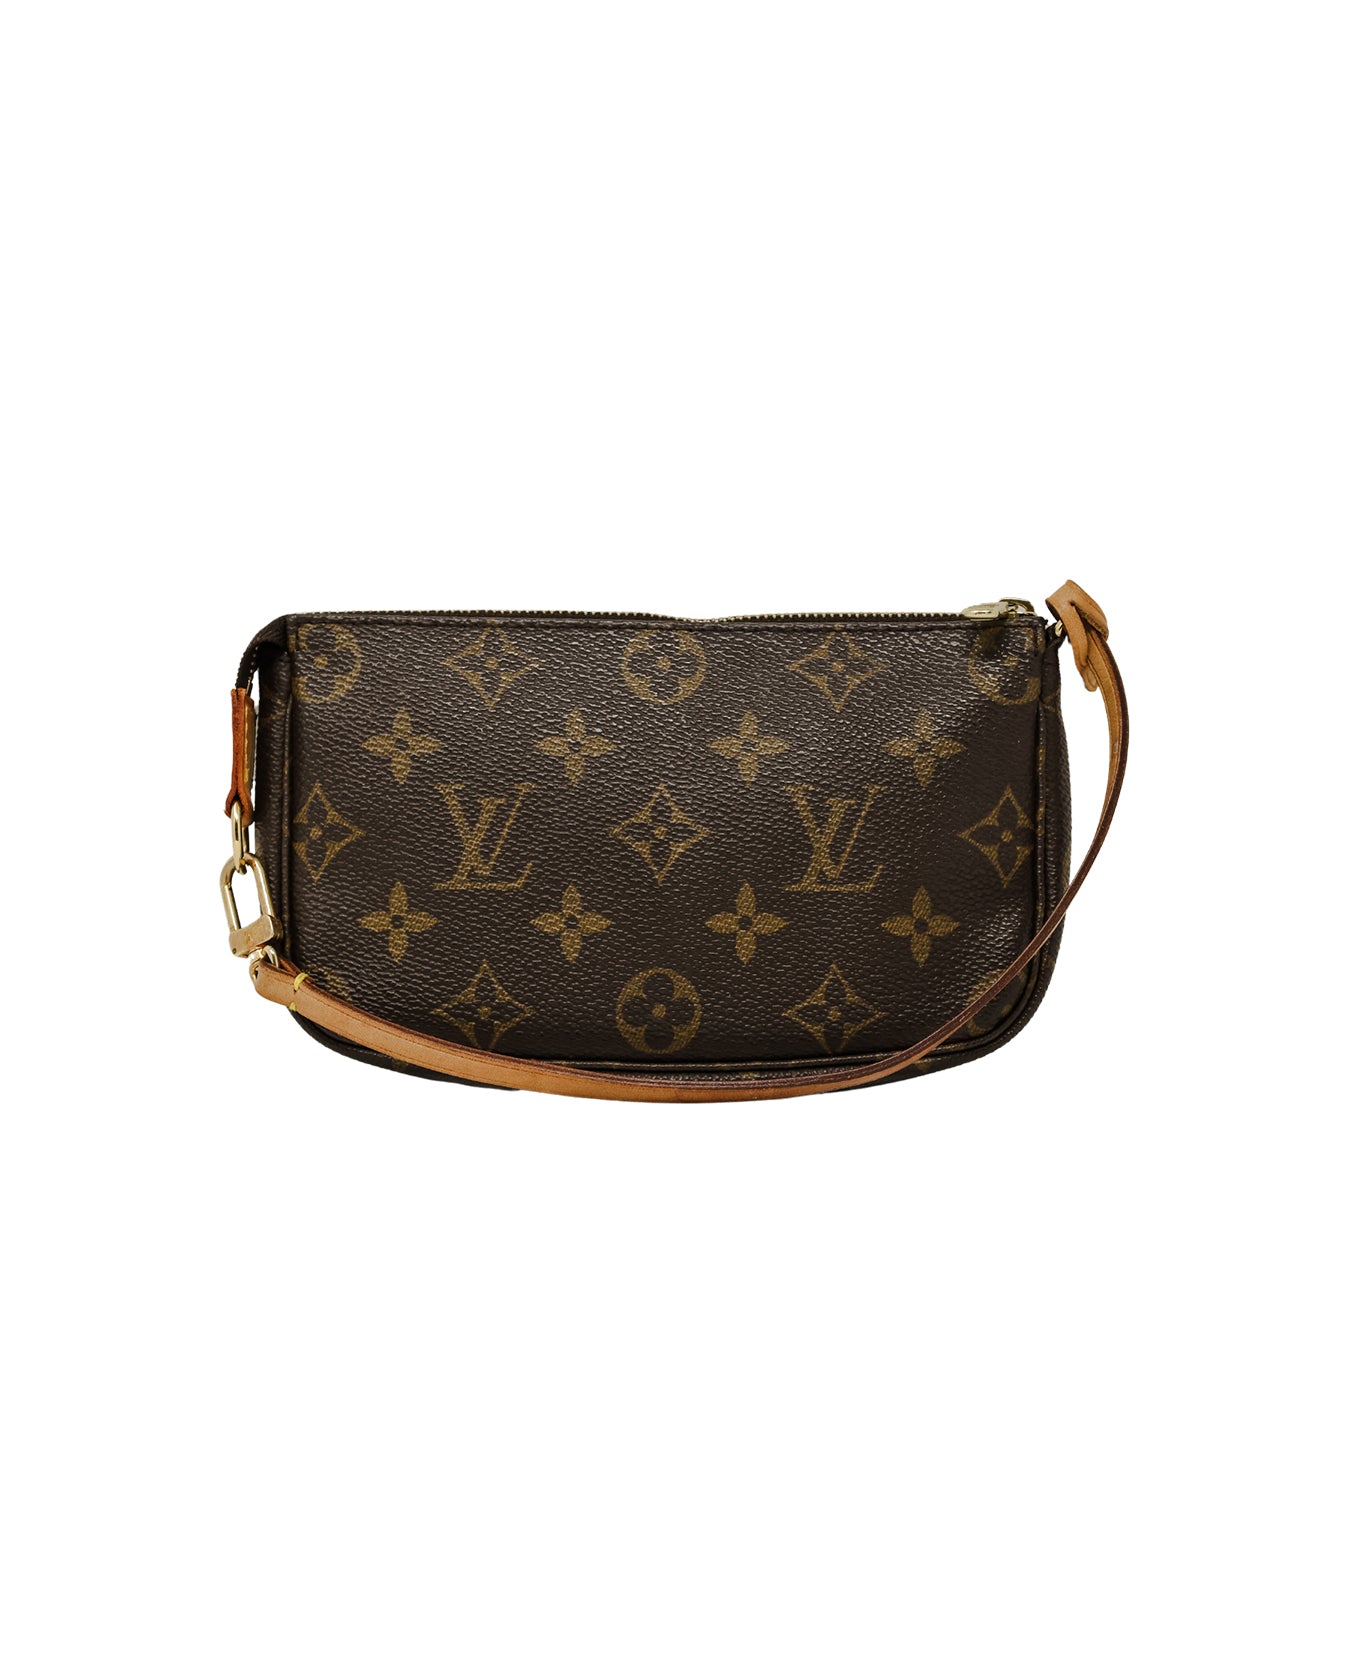 How To Double Strap Your Louis Vuitton Pochette Accessoires - With